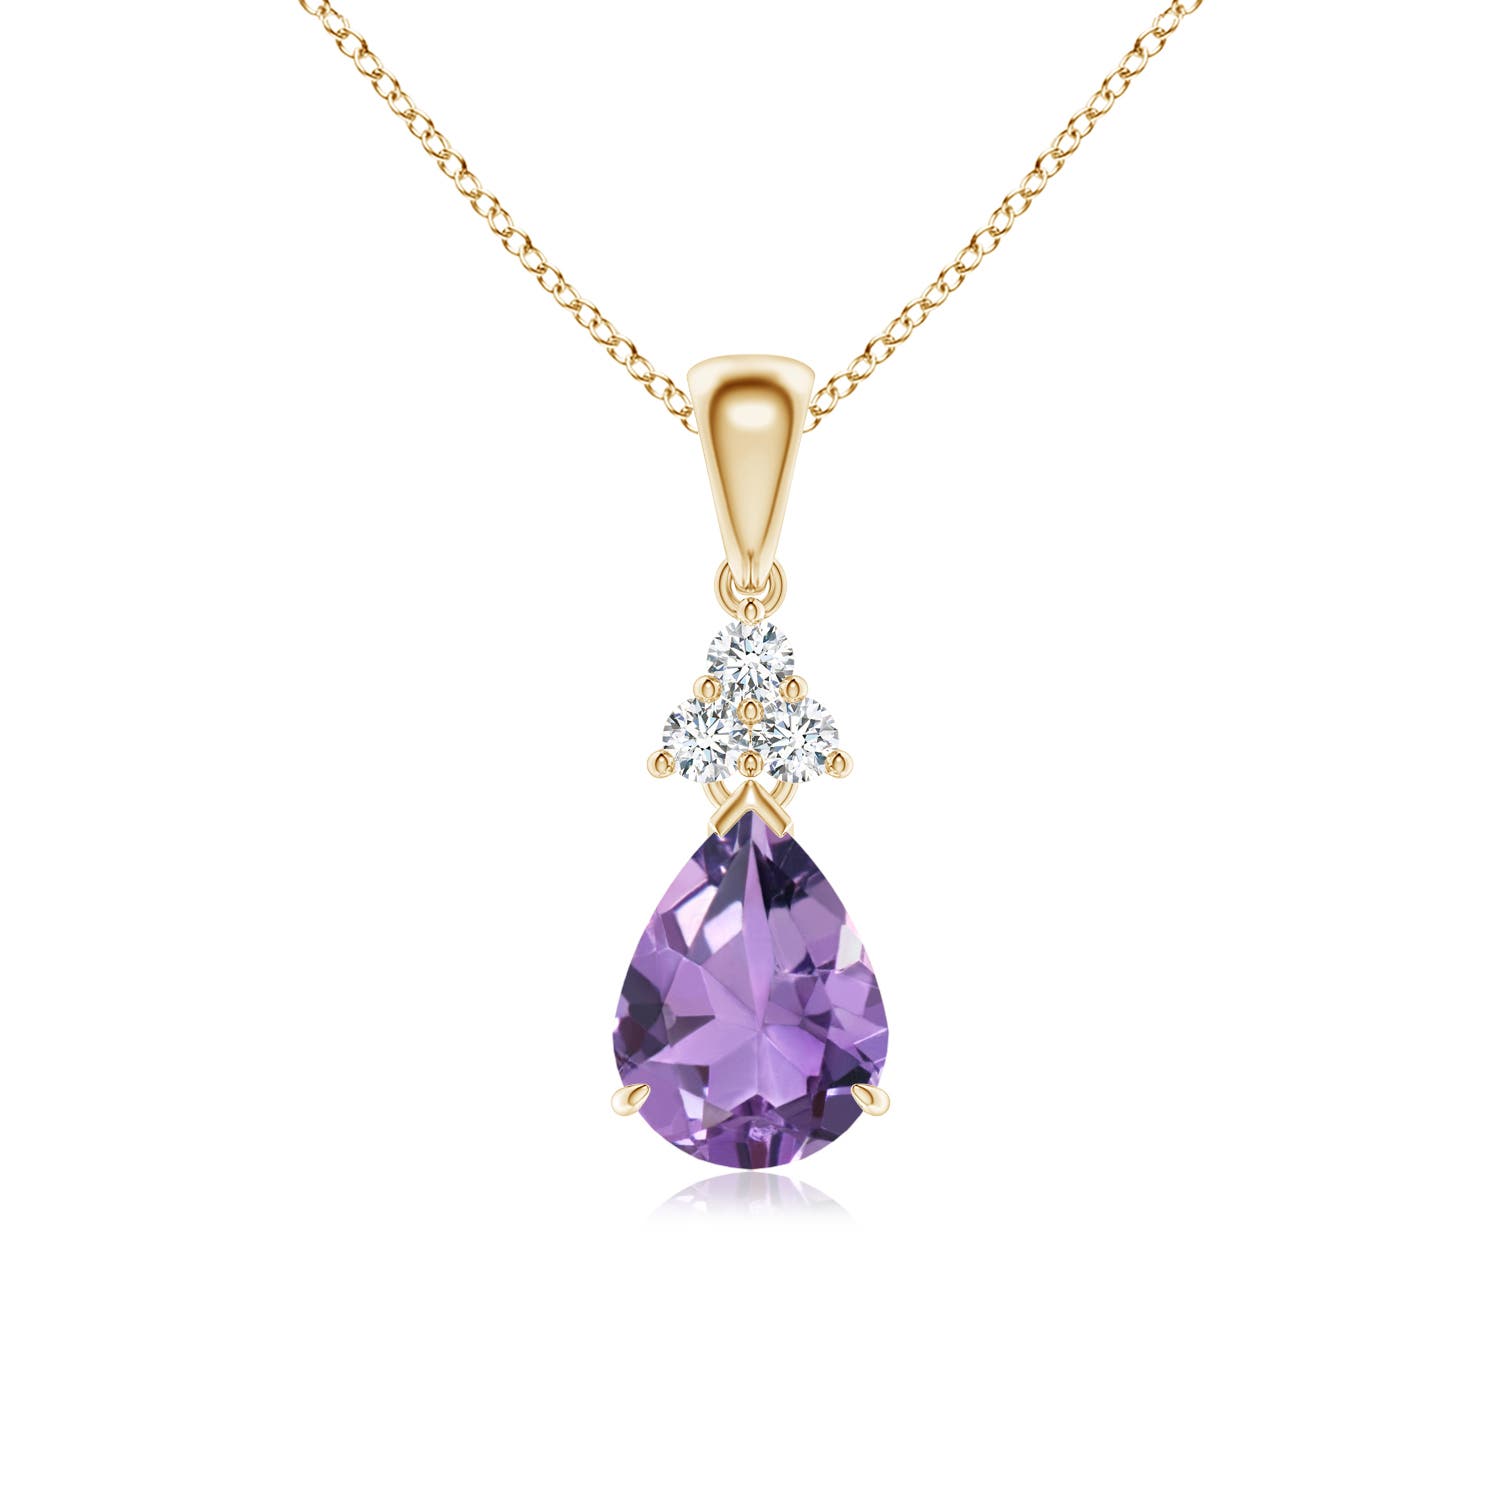 A - Amethyst / 1.08 CT / 14 KT Yellow Gold